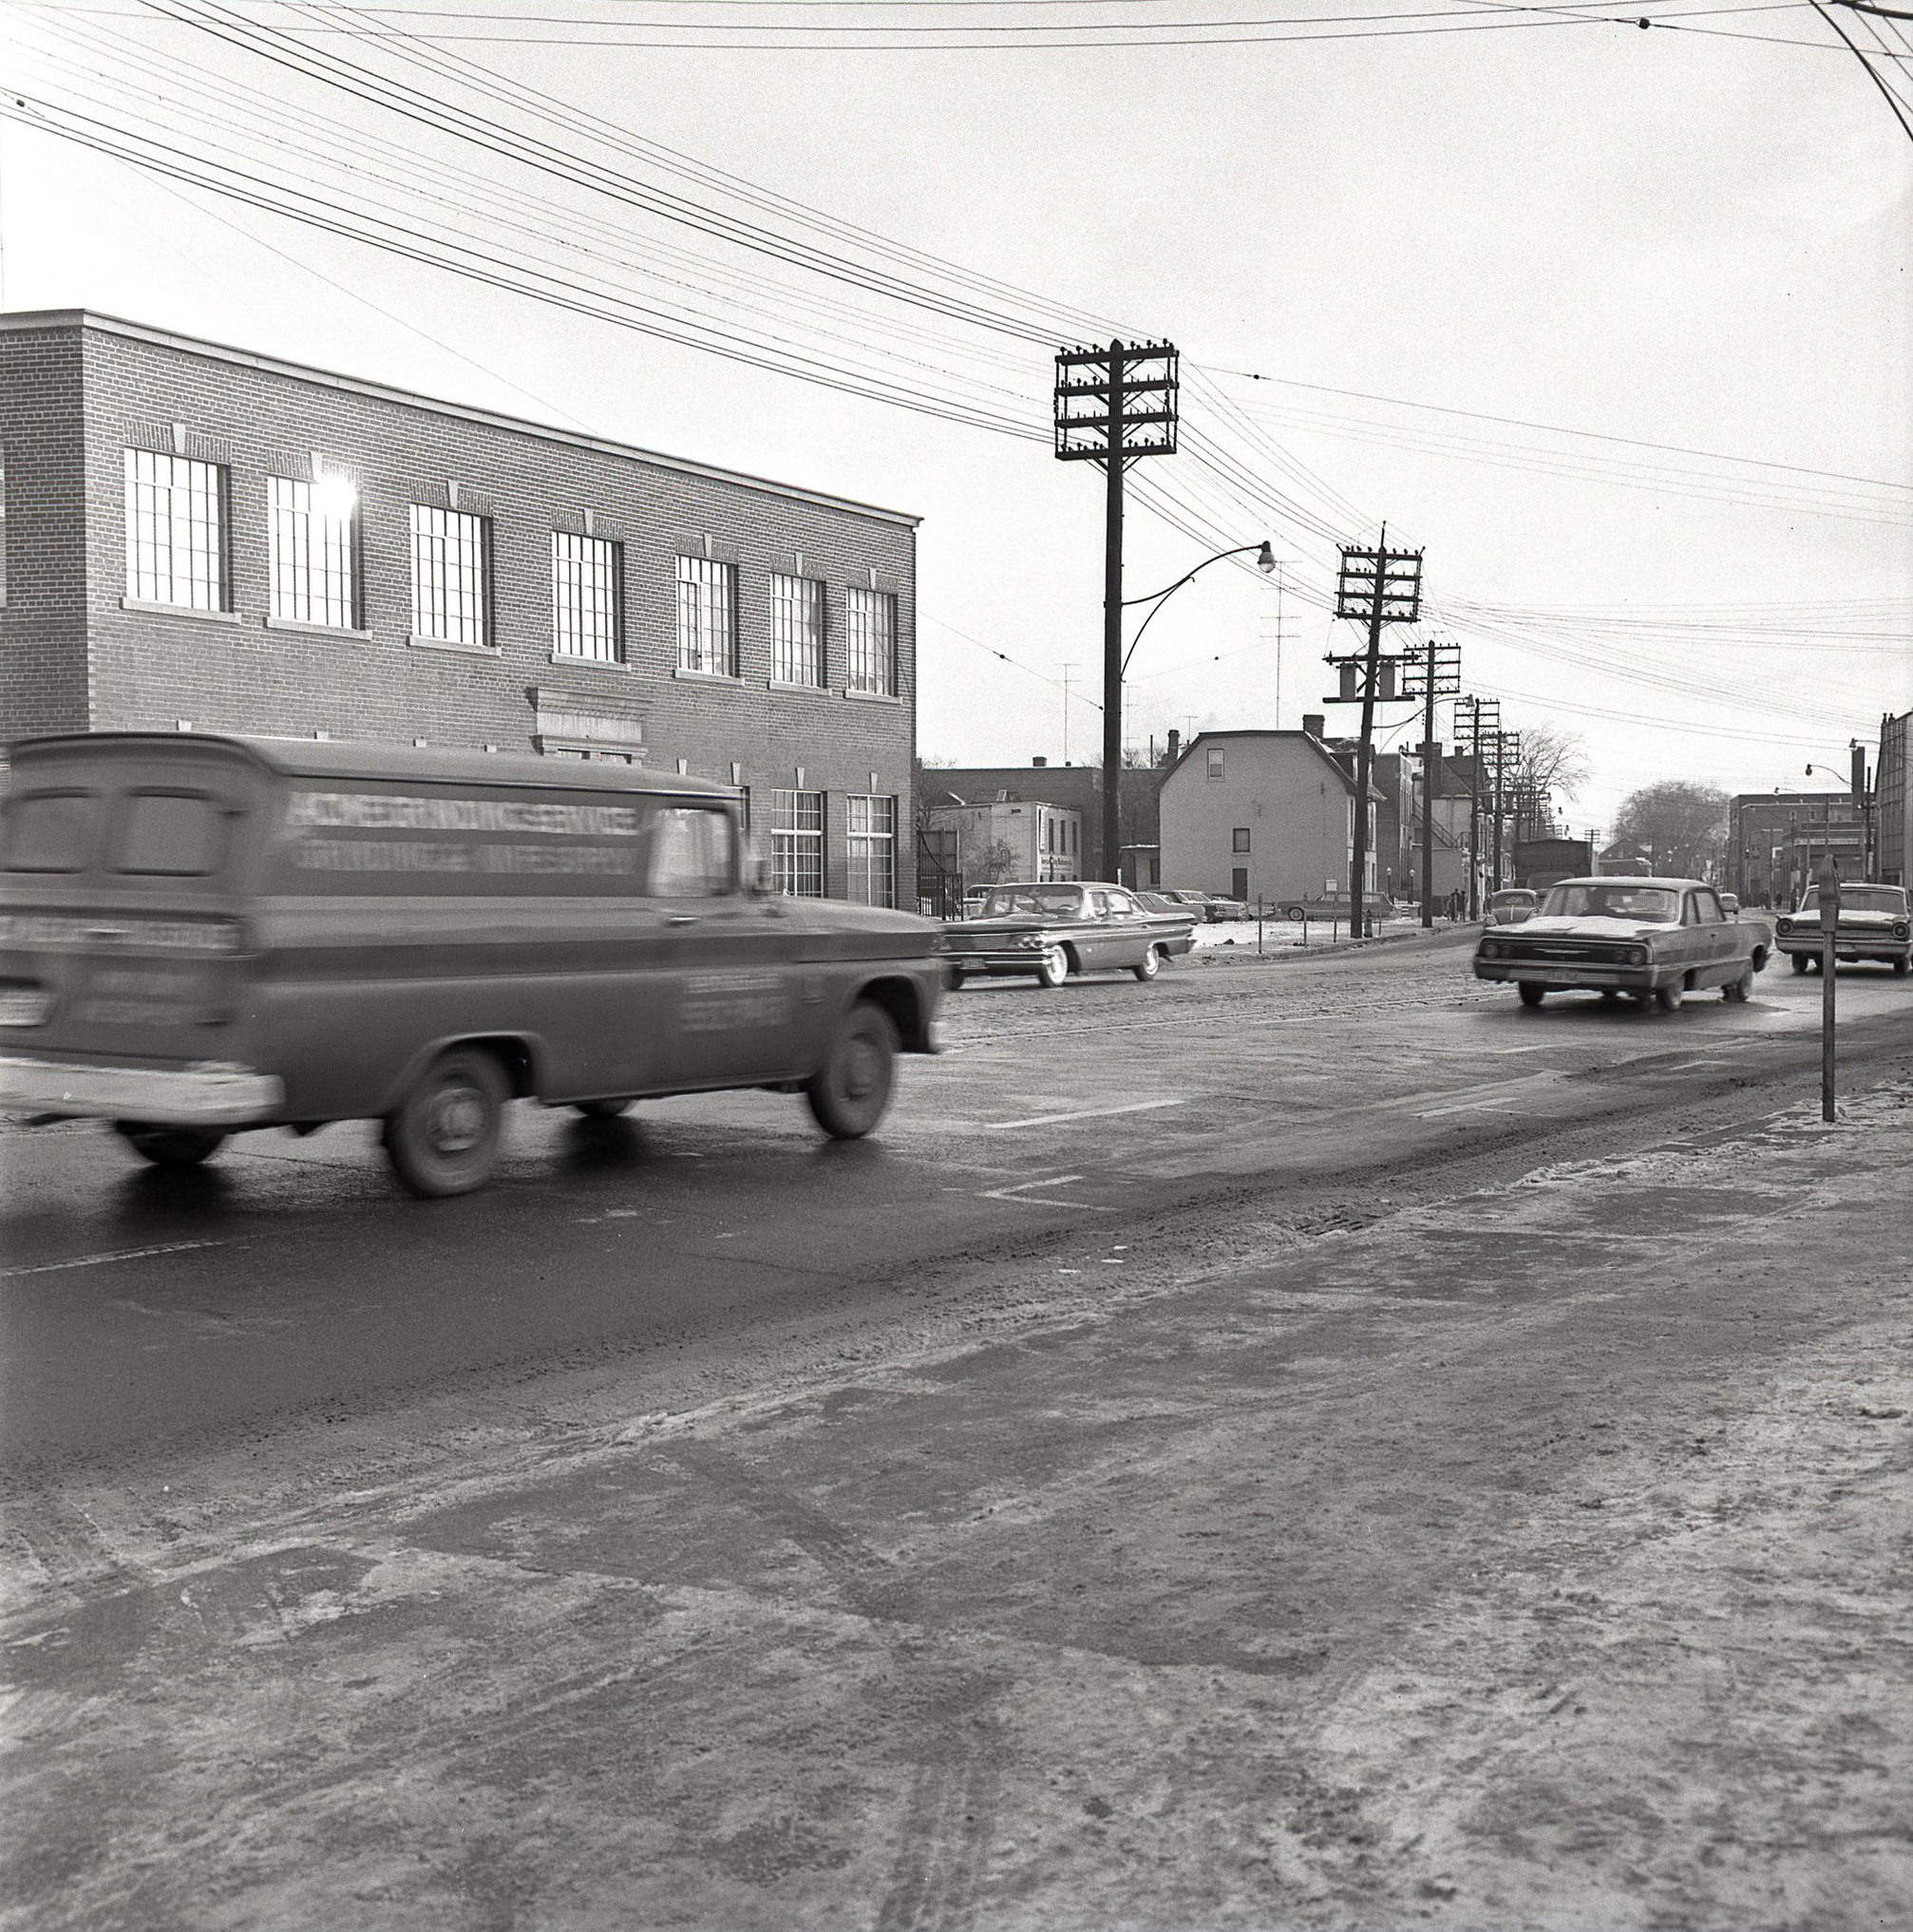 Looking east along Davenport Rd., towards Avenue Rd., 1964. For context, if you zoom in, that metal fire escape in the distance still exists, and is on the side of the building that is now Avenue Diner at 222 Davenport. The diner was 'Avenue Coffee Shops' in 1964